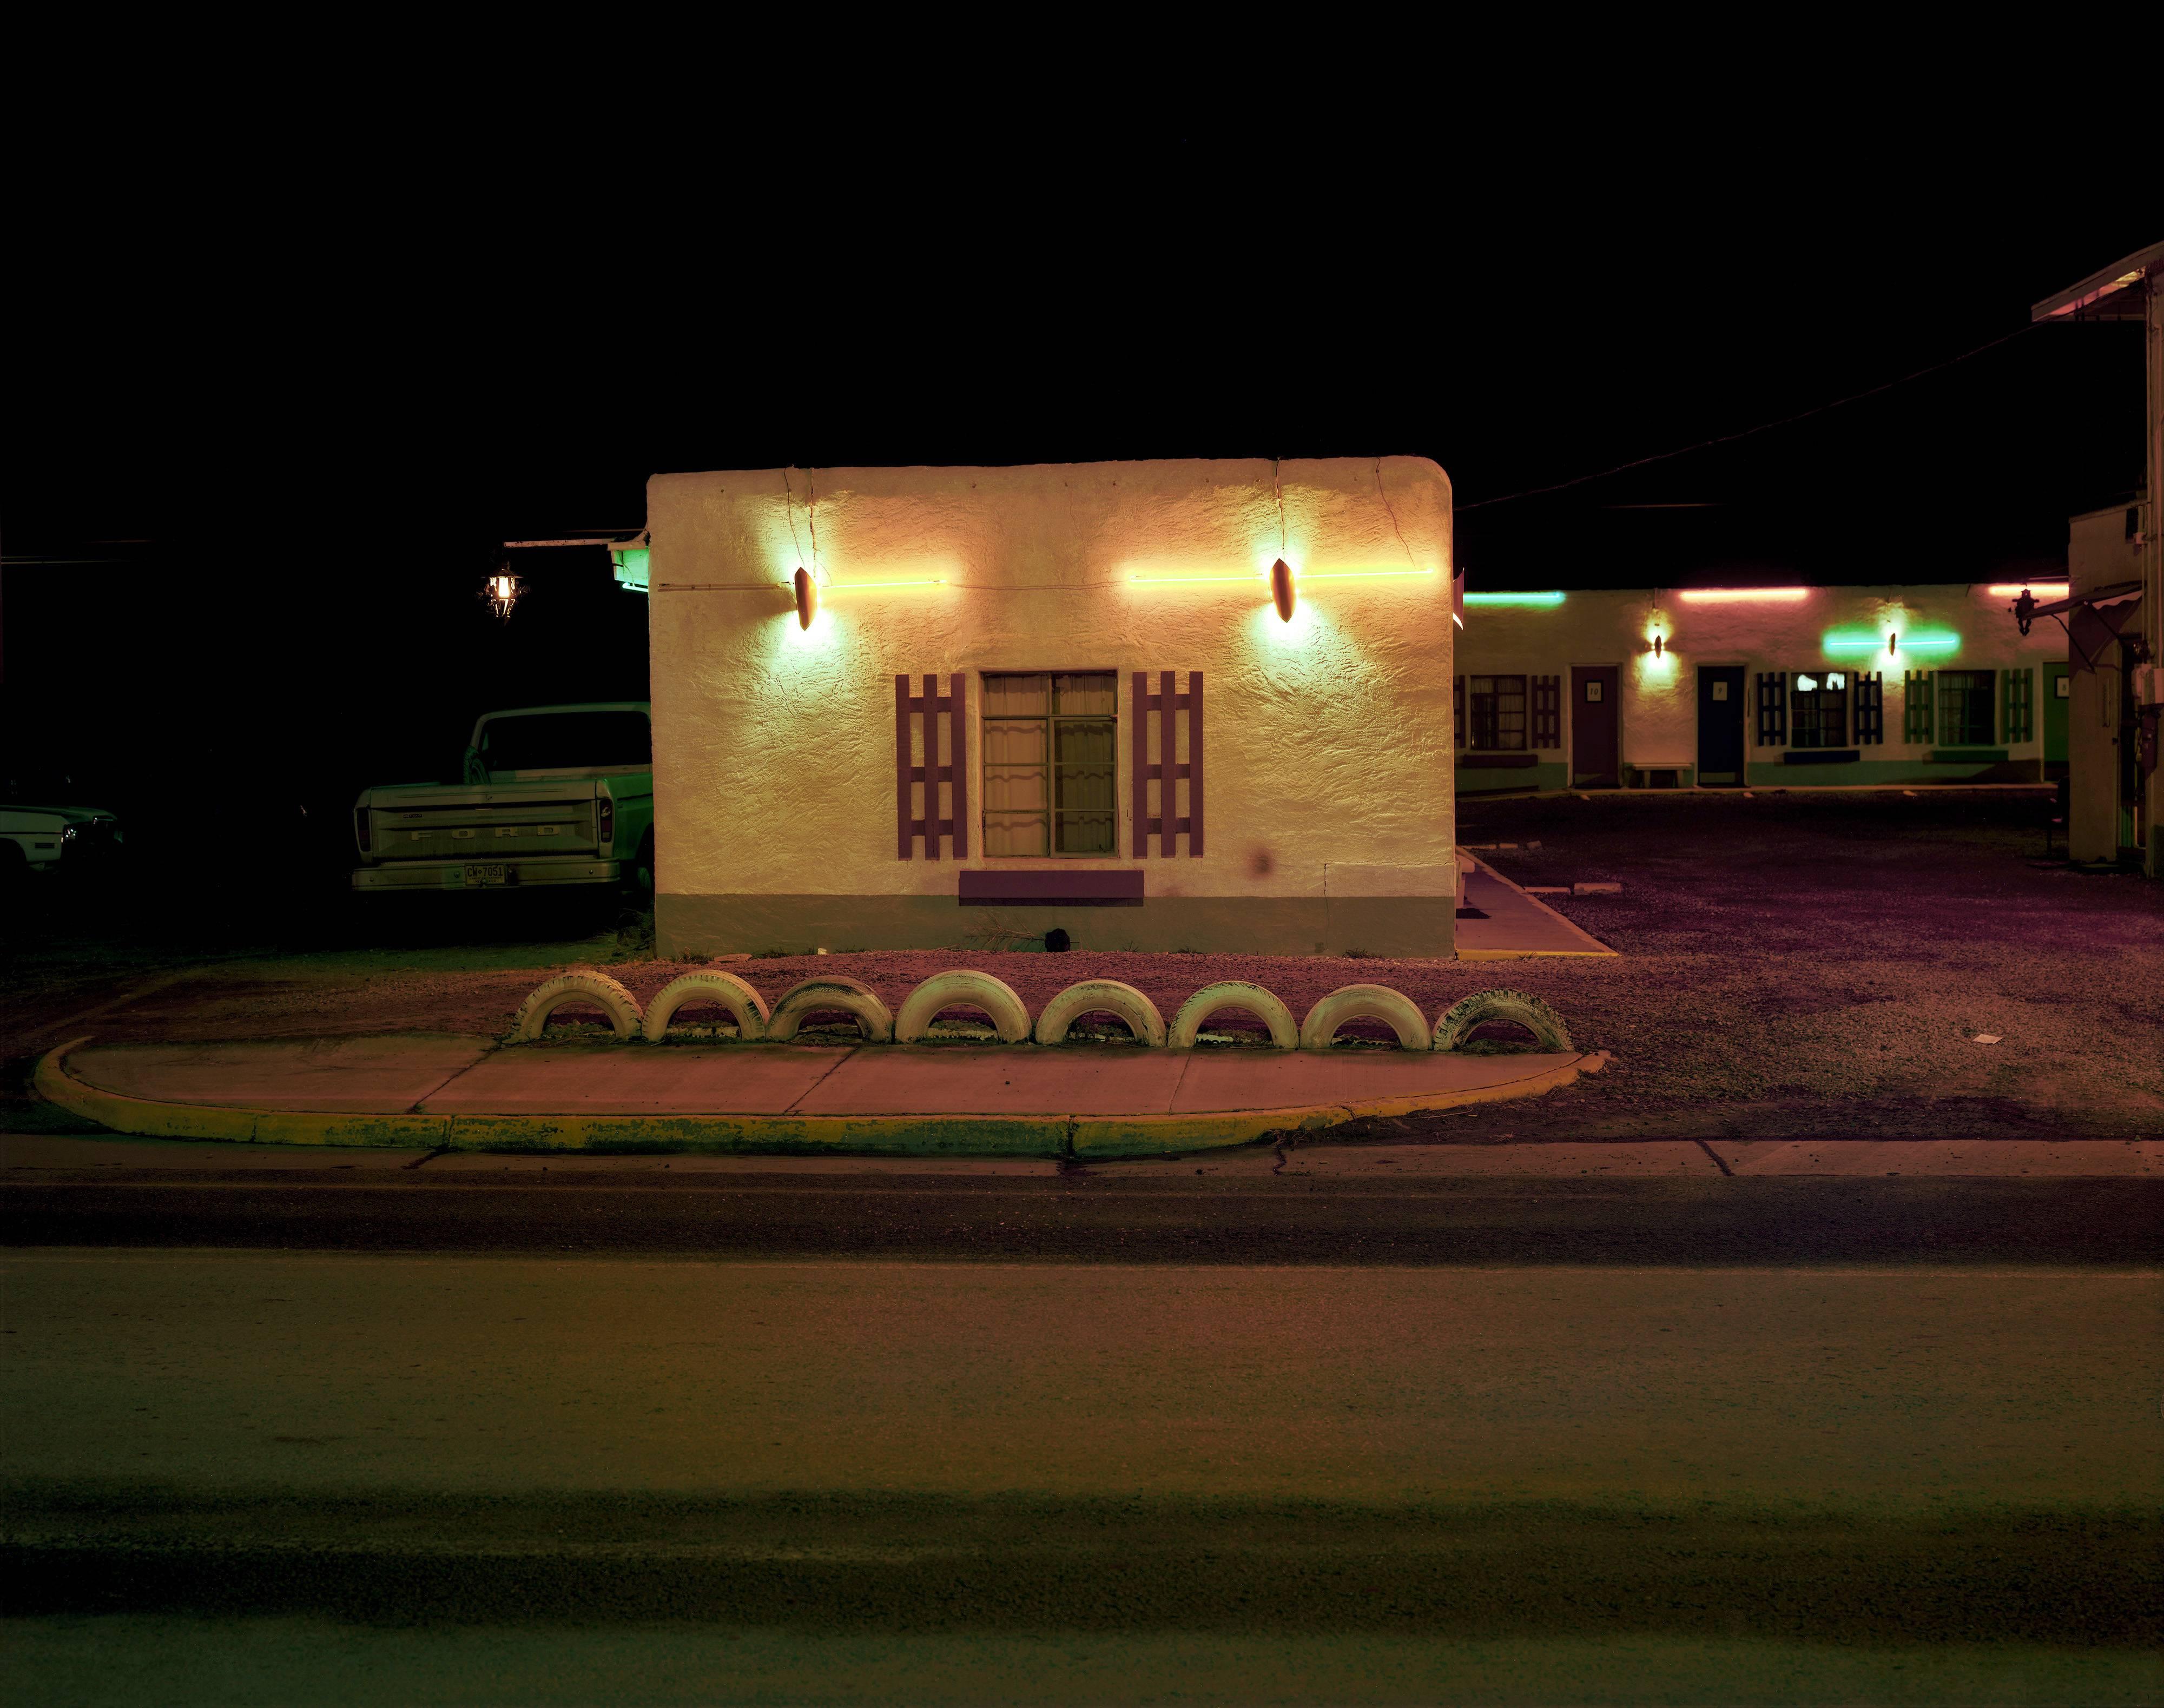 Steve Fitch Landscape Photograph - It'll Do Motel, Highway 66, Grants, New Mexico, January 11, 1982